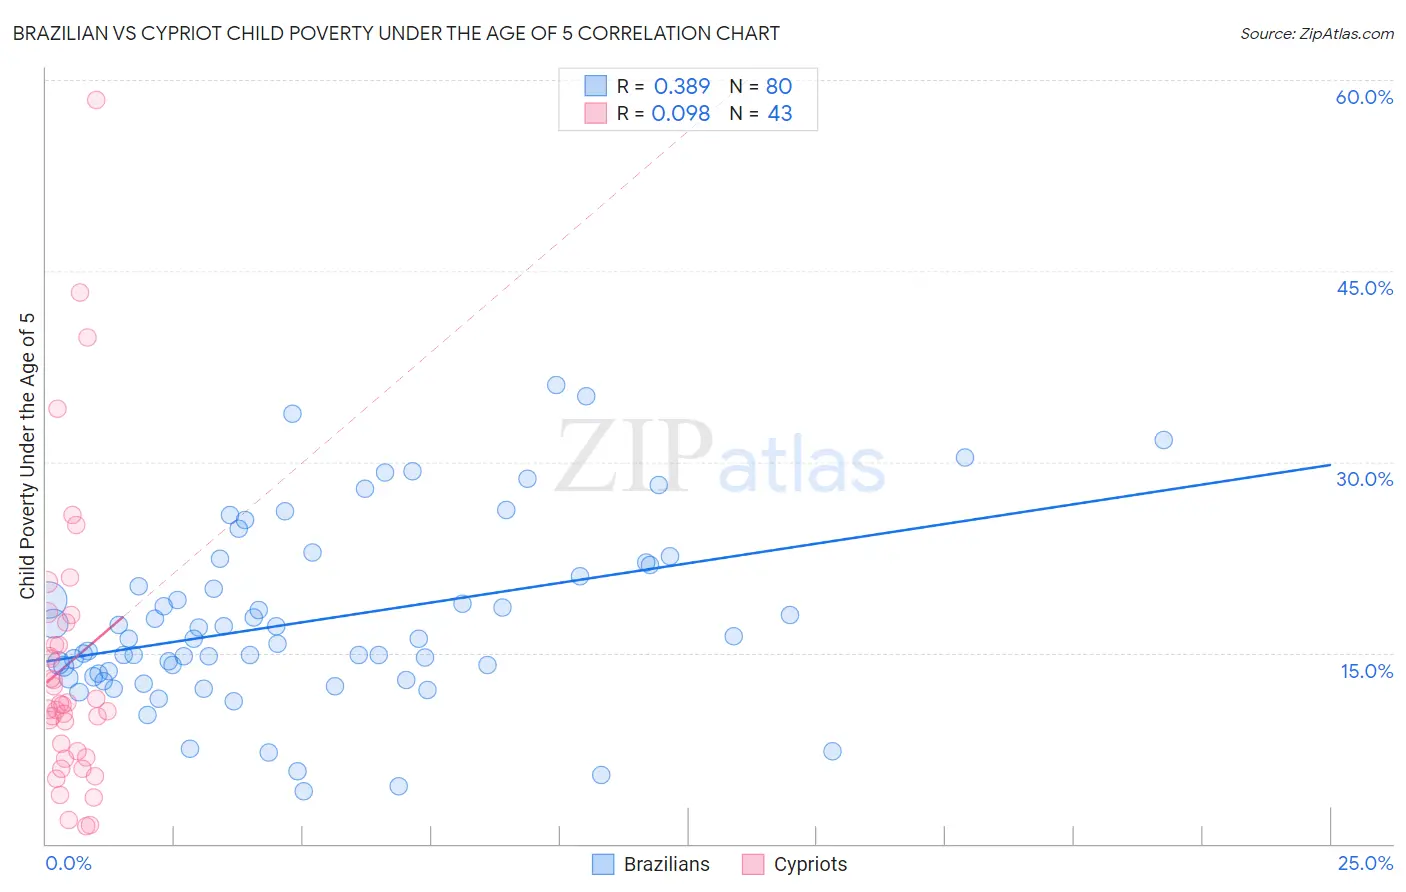 Brazilian vs Cypriot Child Poverty Under the Age of 5